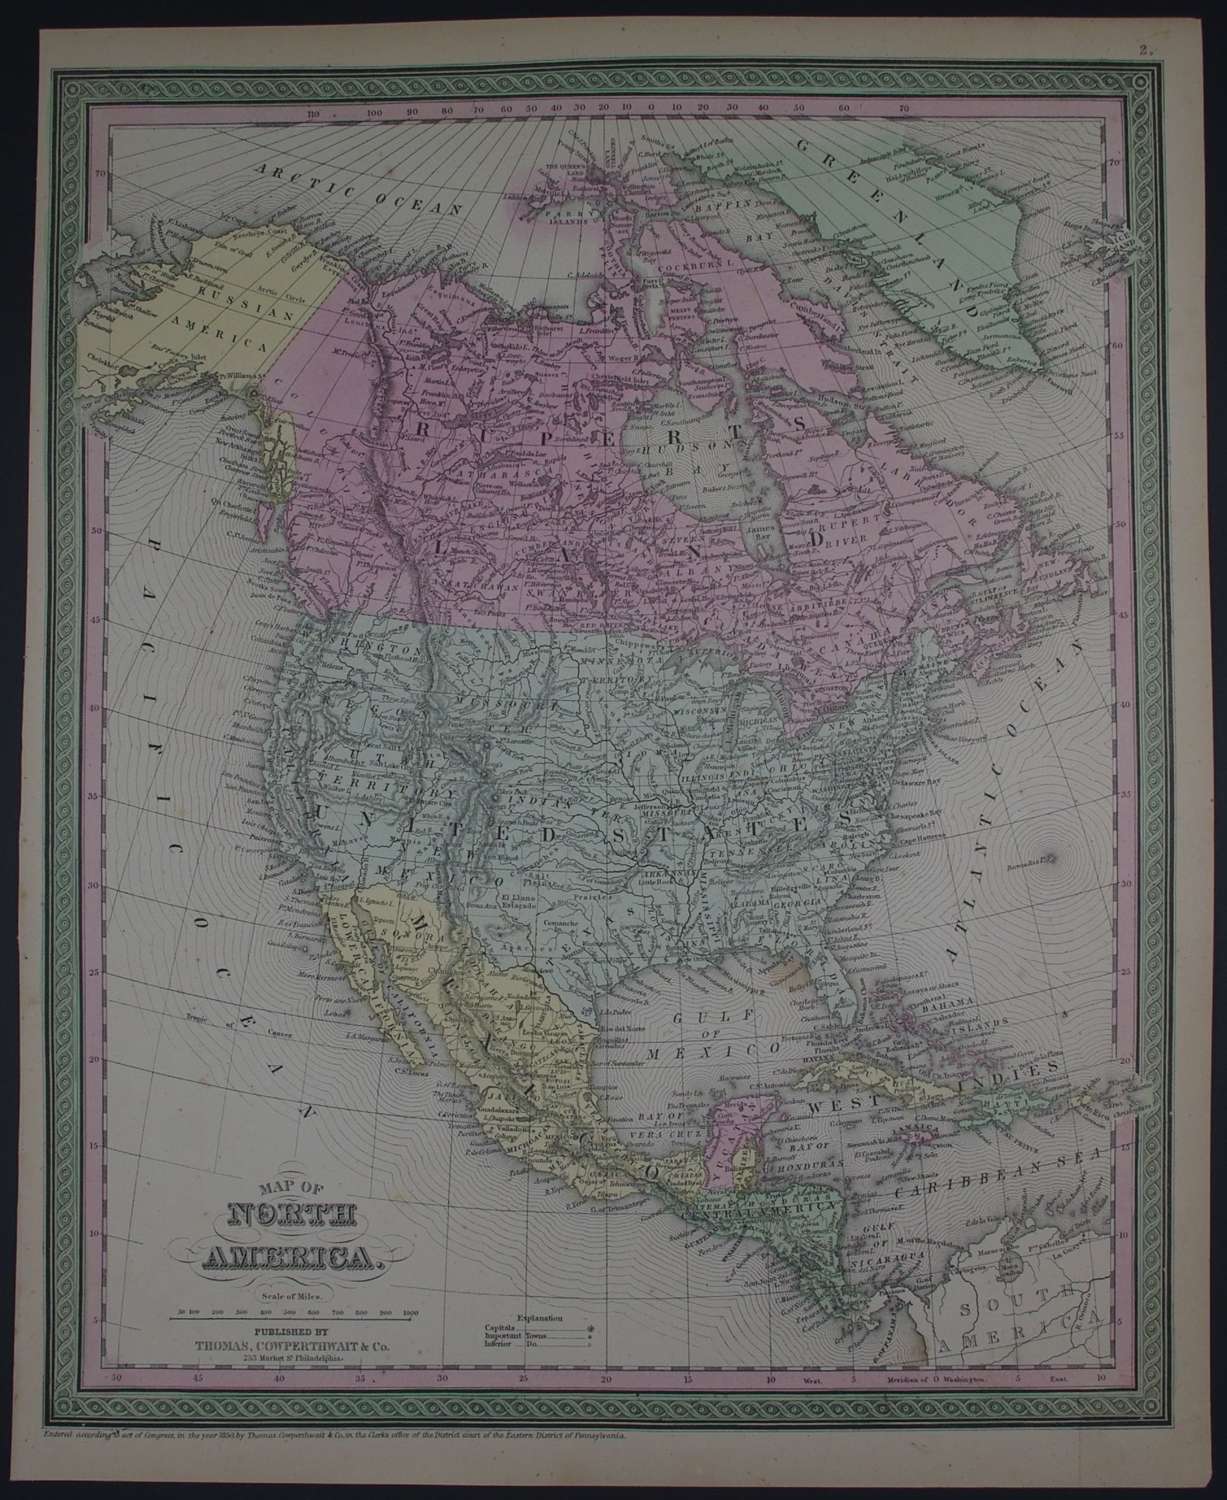 Map of North America by Thomas, Cowperthwait & Co